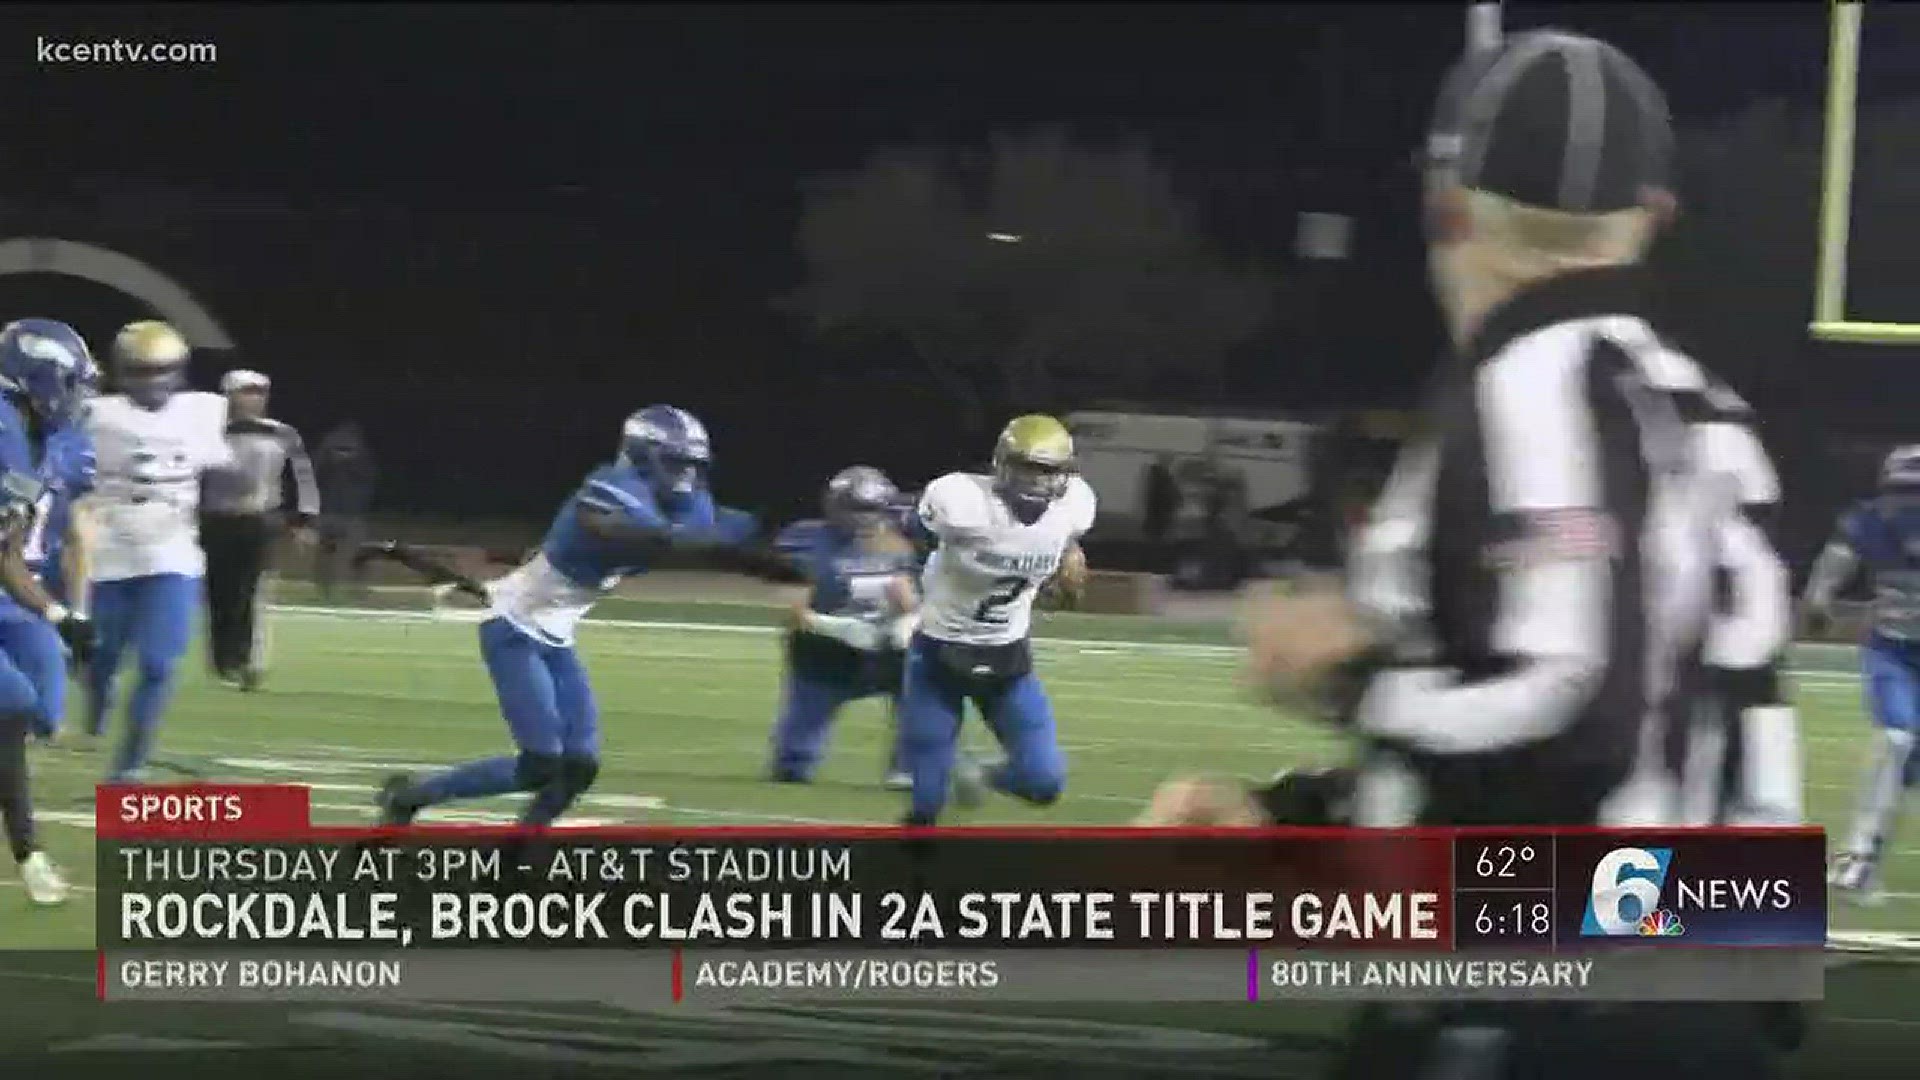 Rockdale and Brock will clash in 2A state title game.